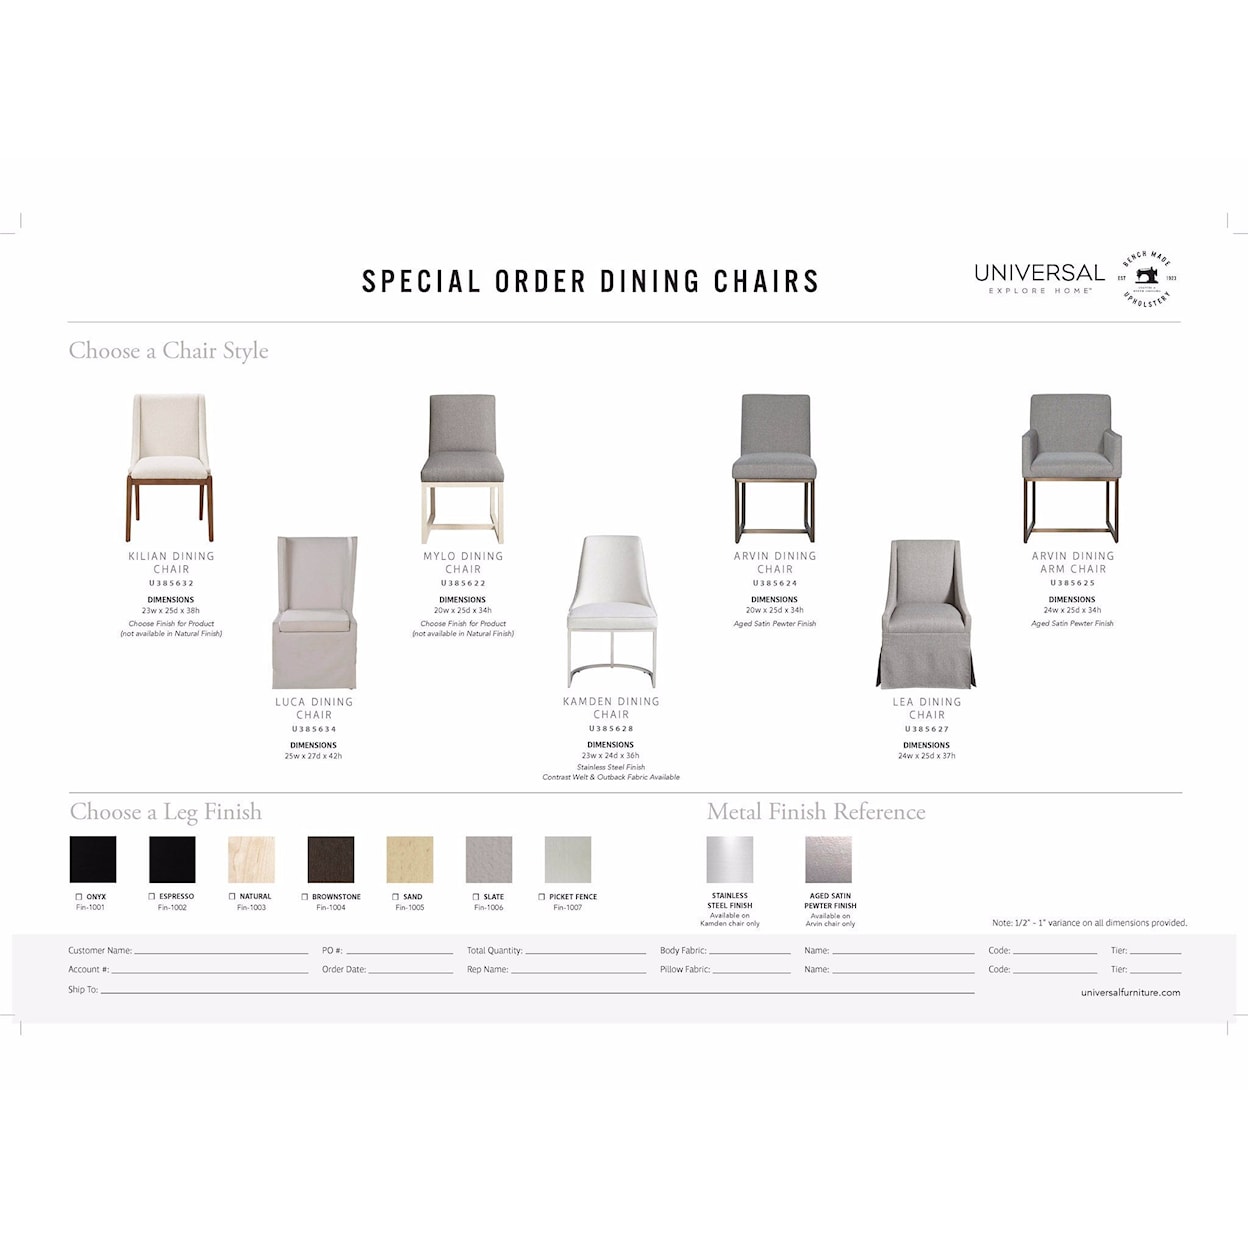 Universal Special Order Arvin Dining Chair - Special Order